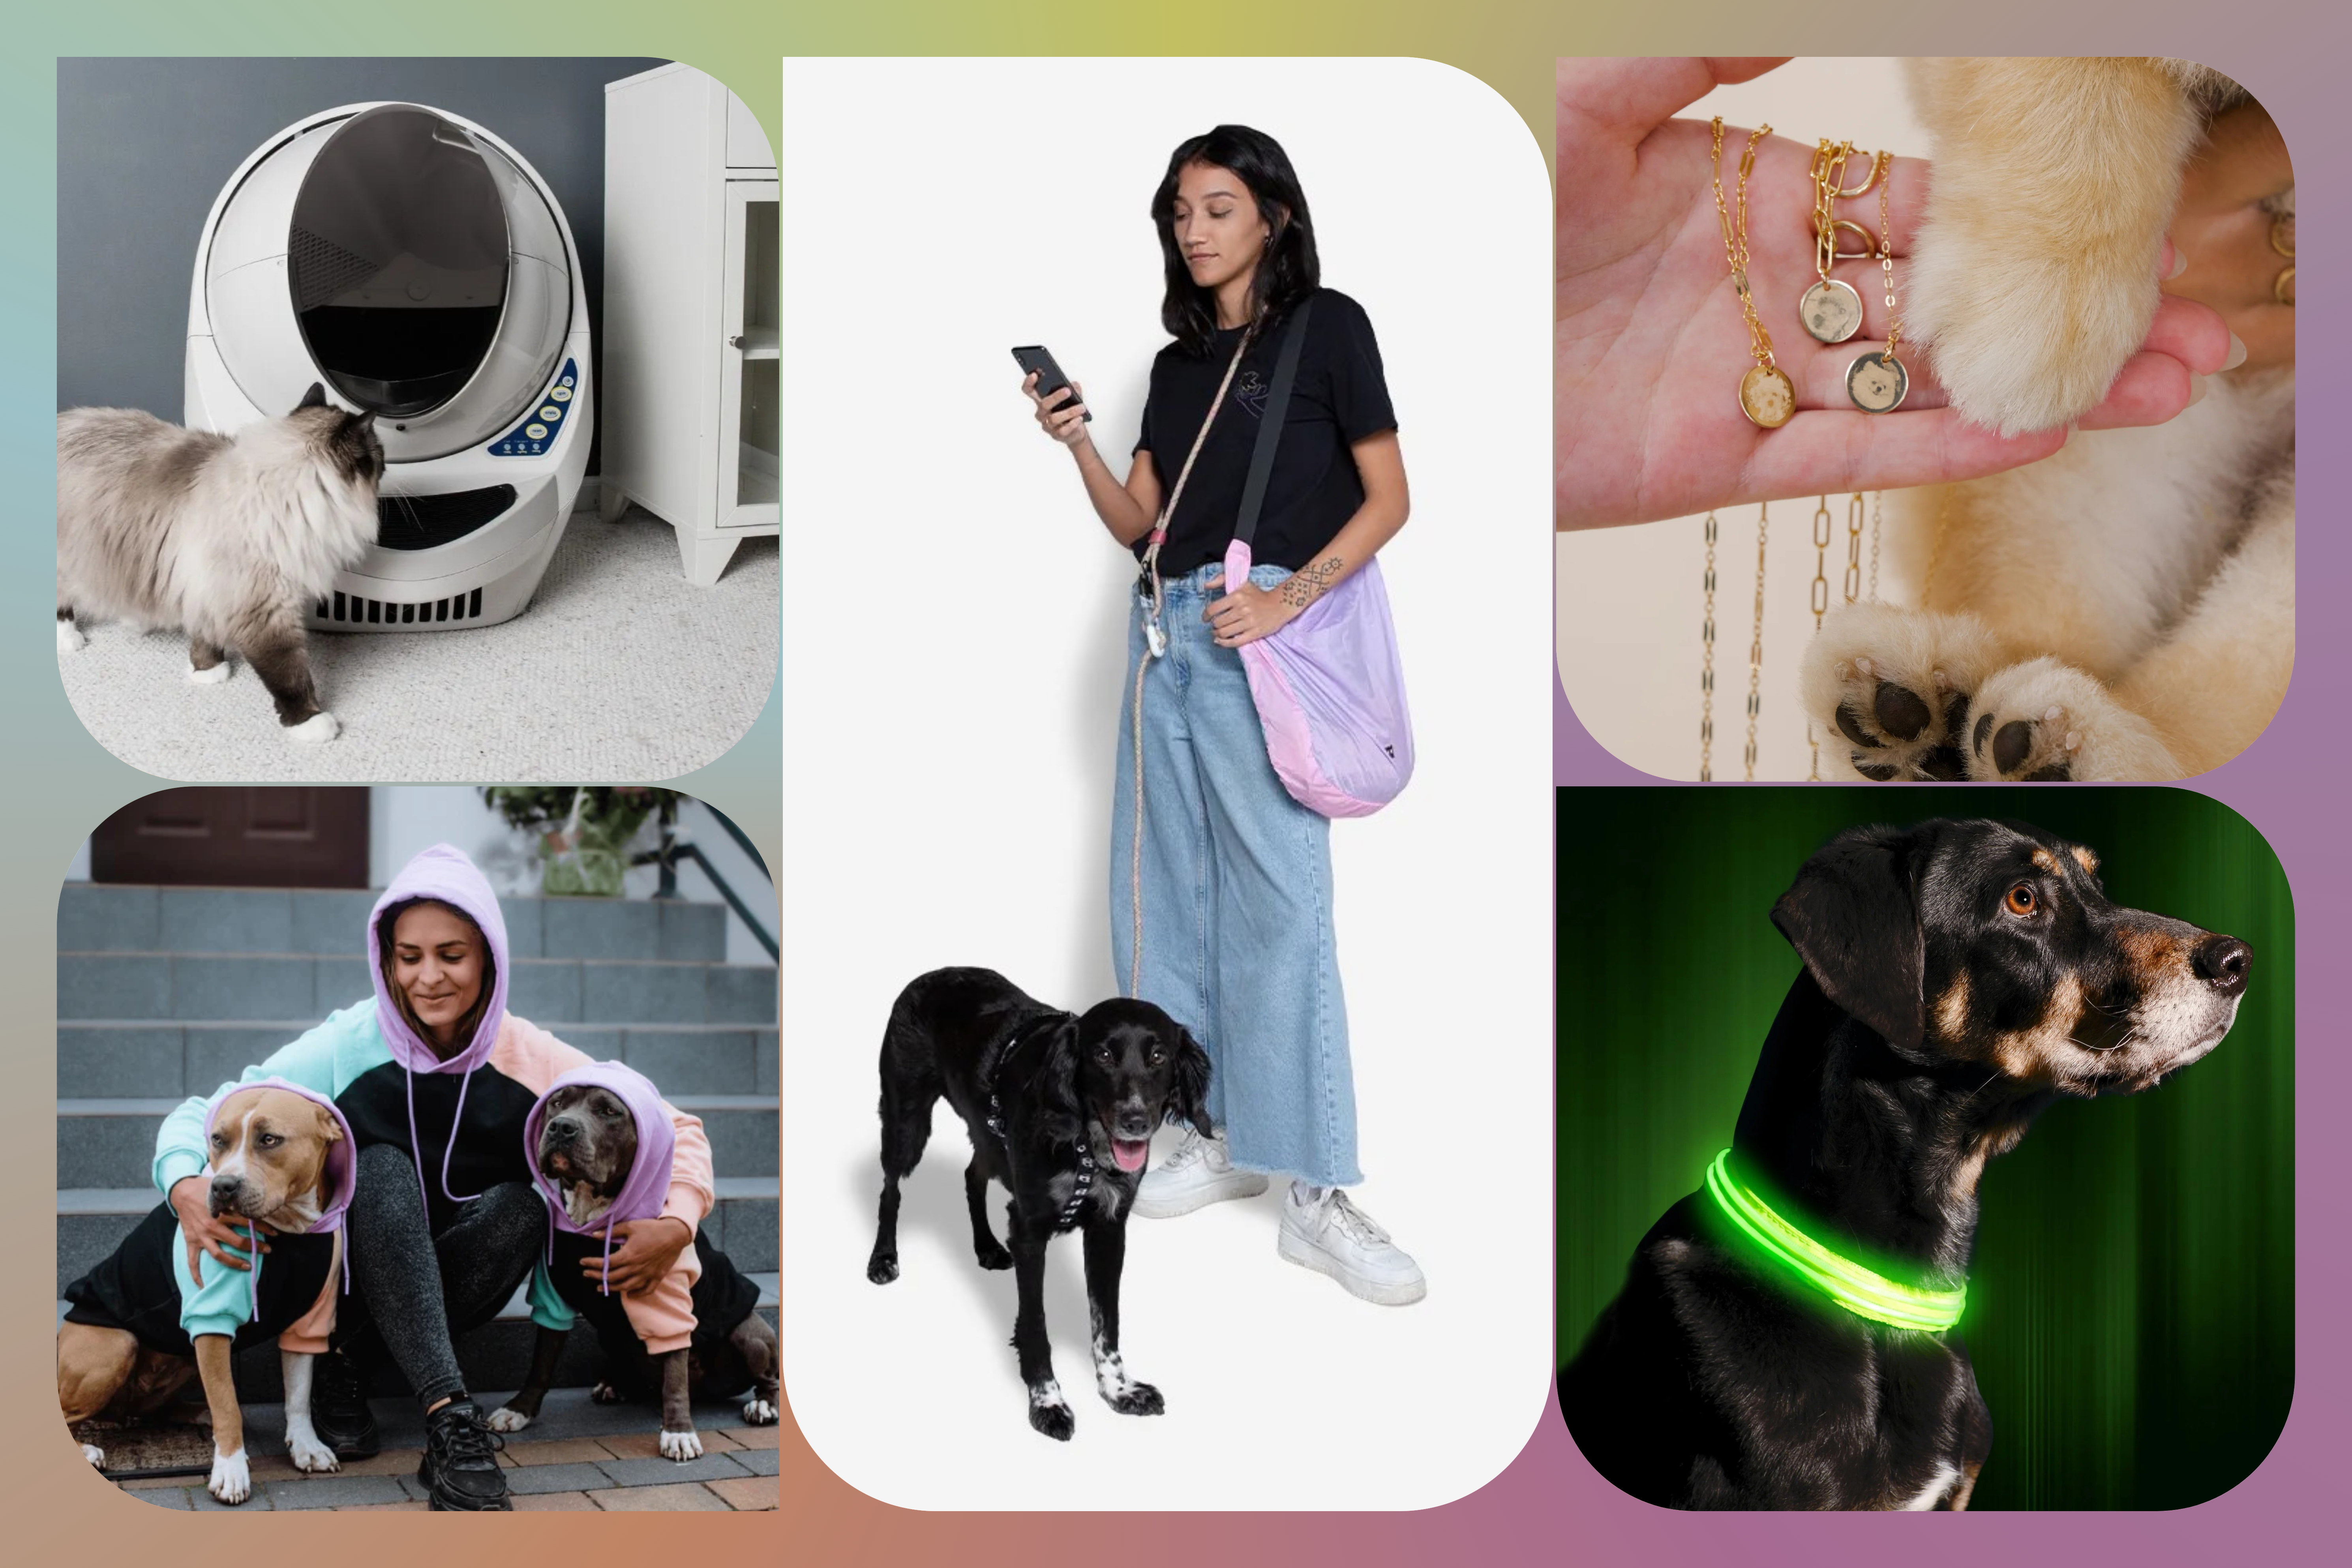 A composition of photos displaying various pet products